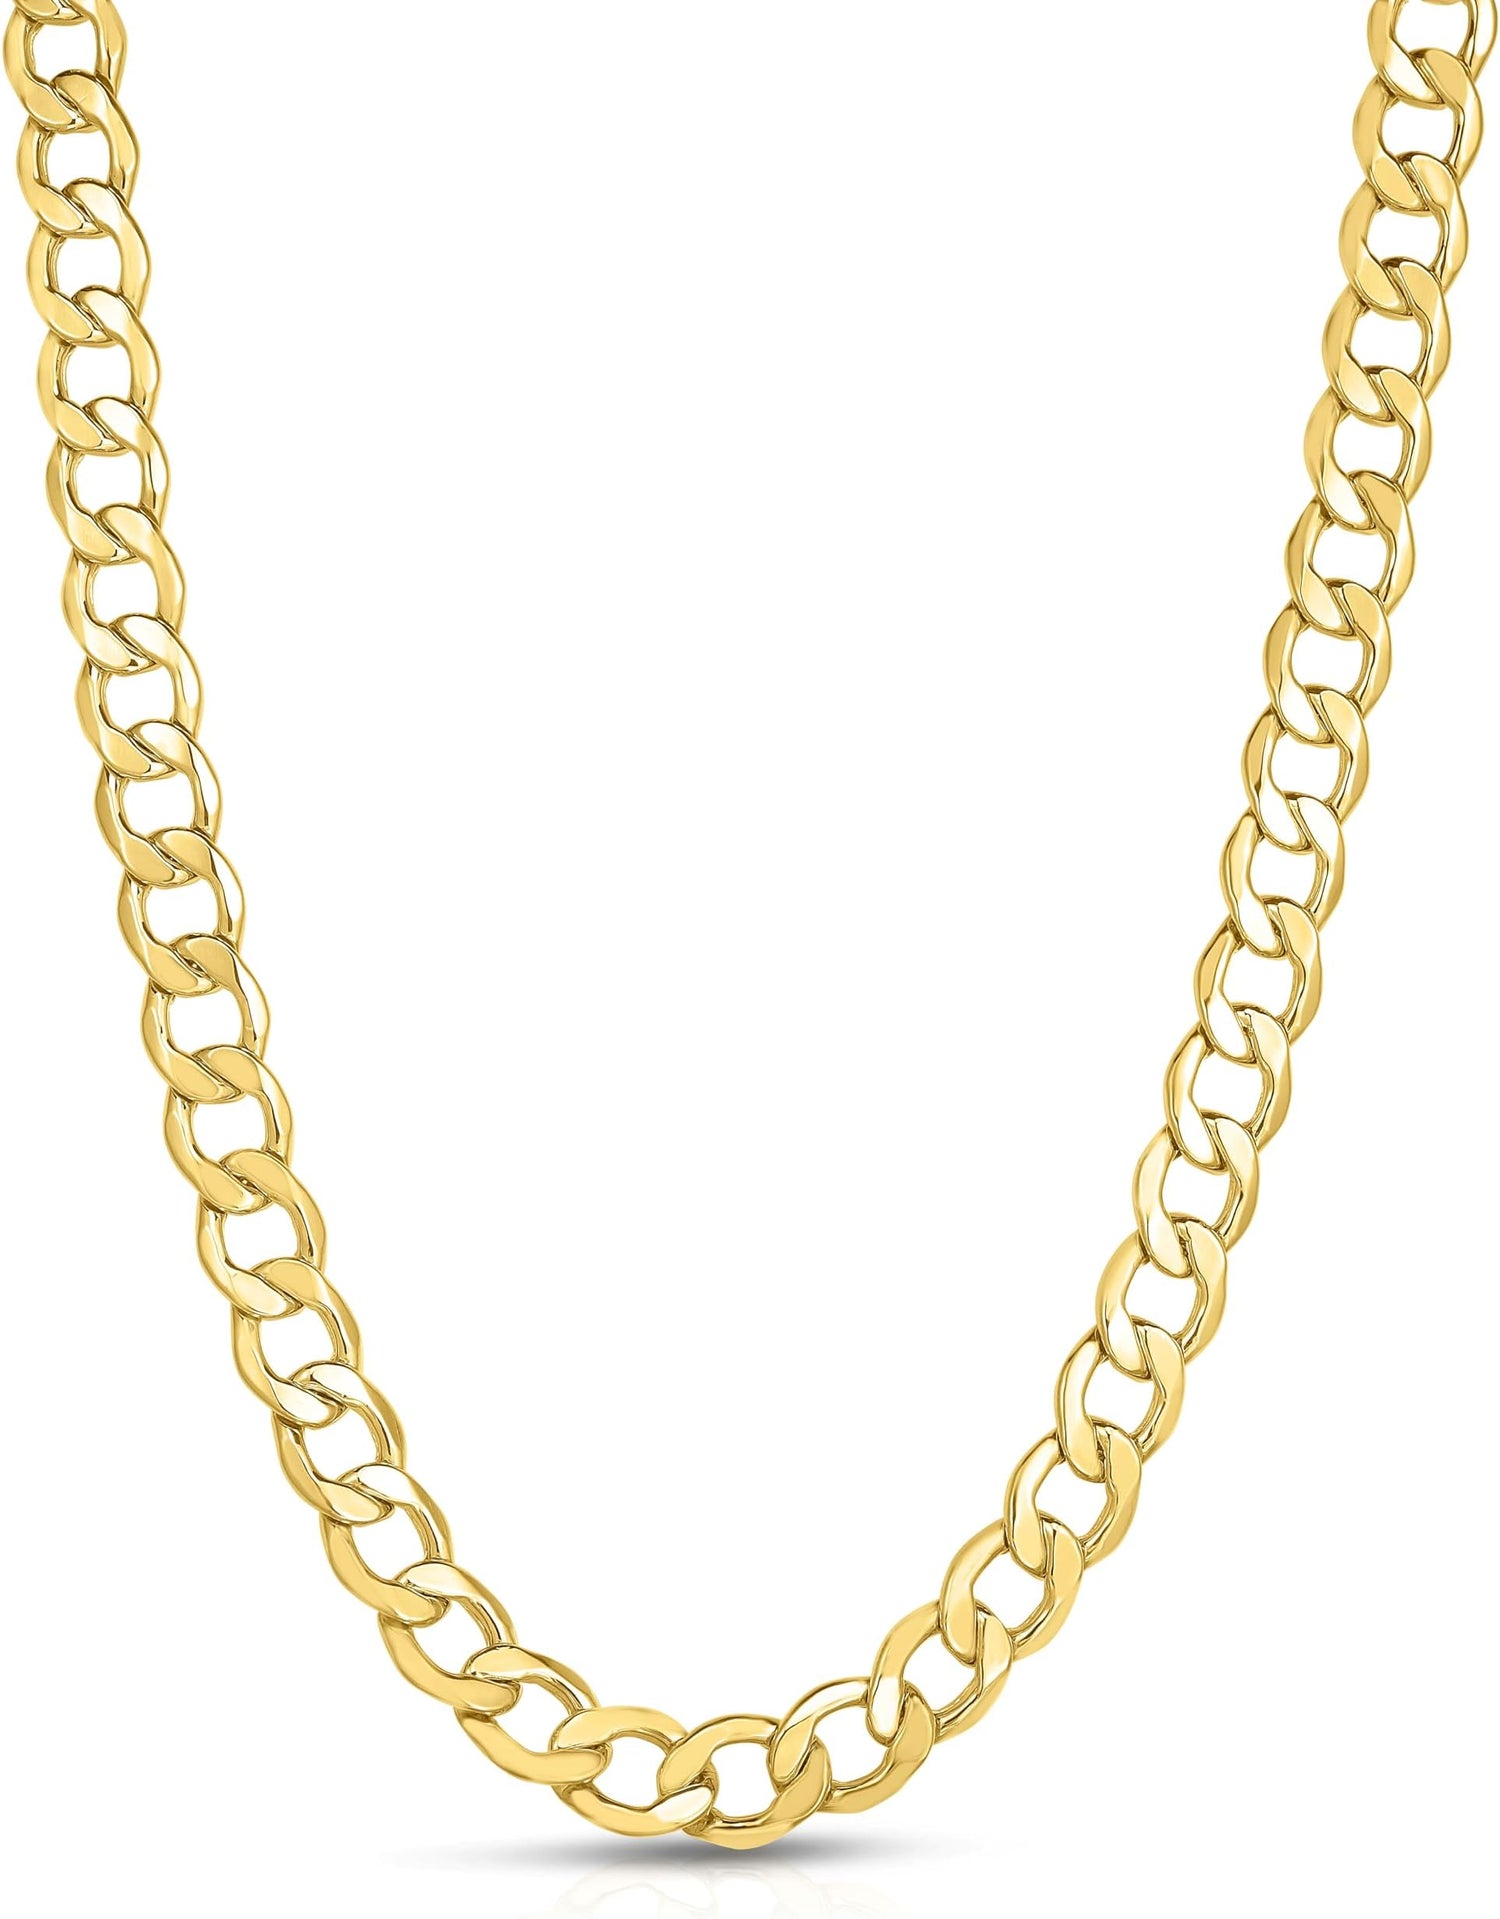 10k Yellow Gold 8mm Hollow Cuban Curb Link Chain Necklace